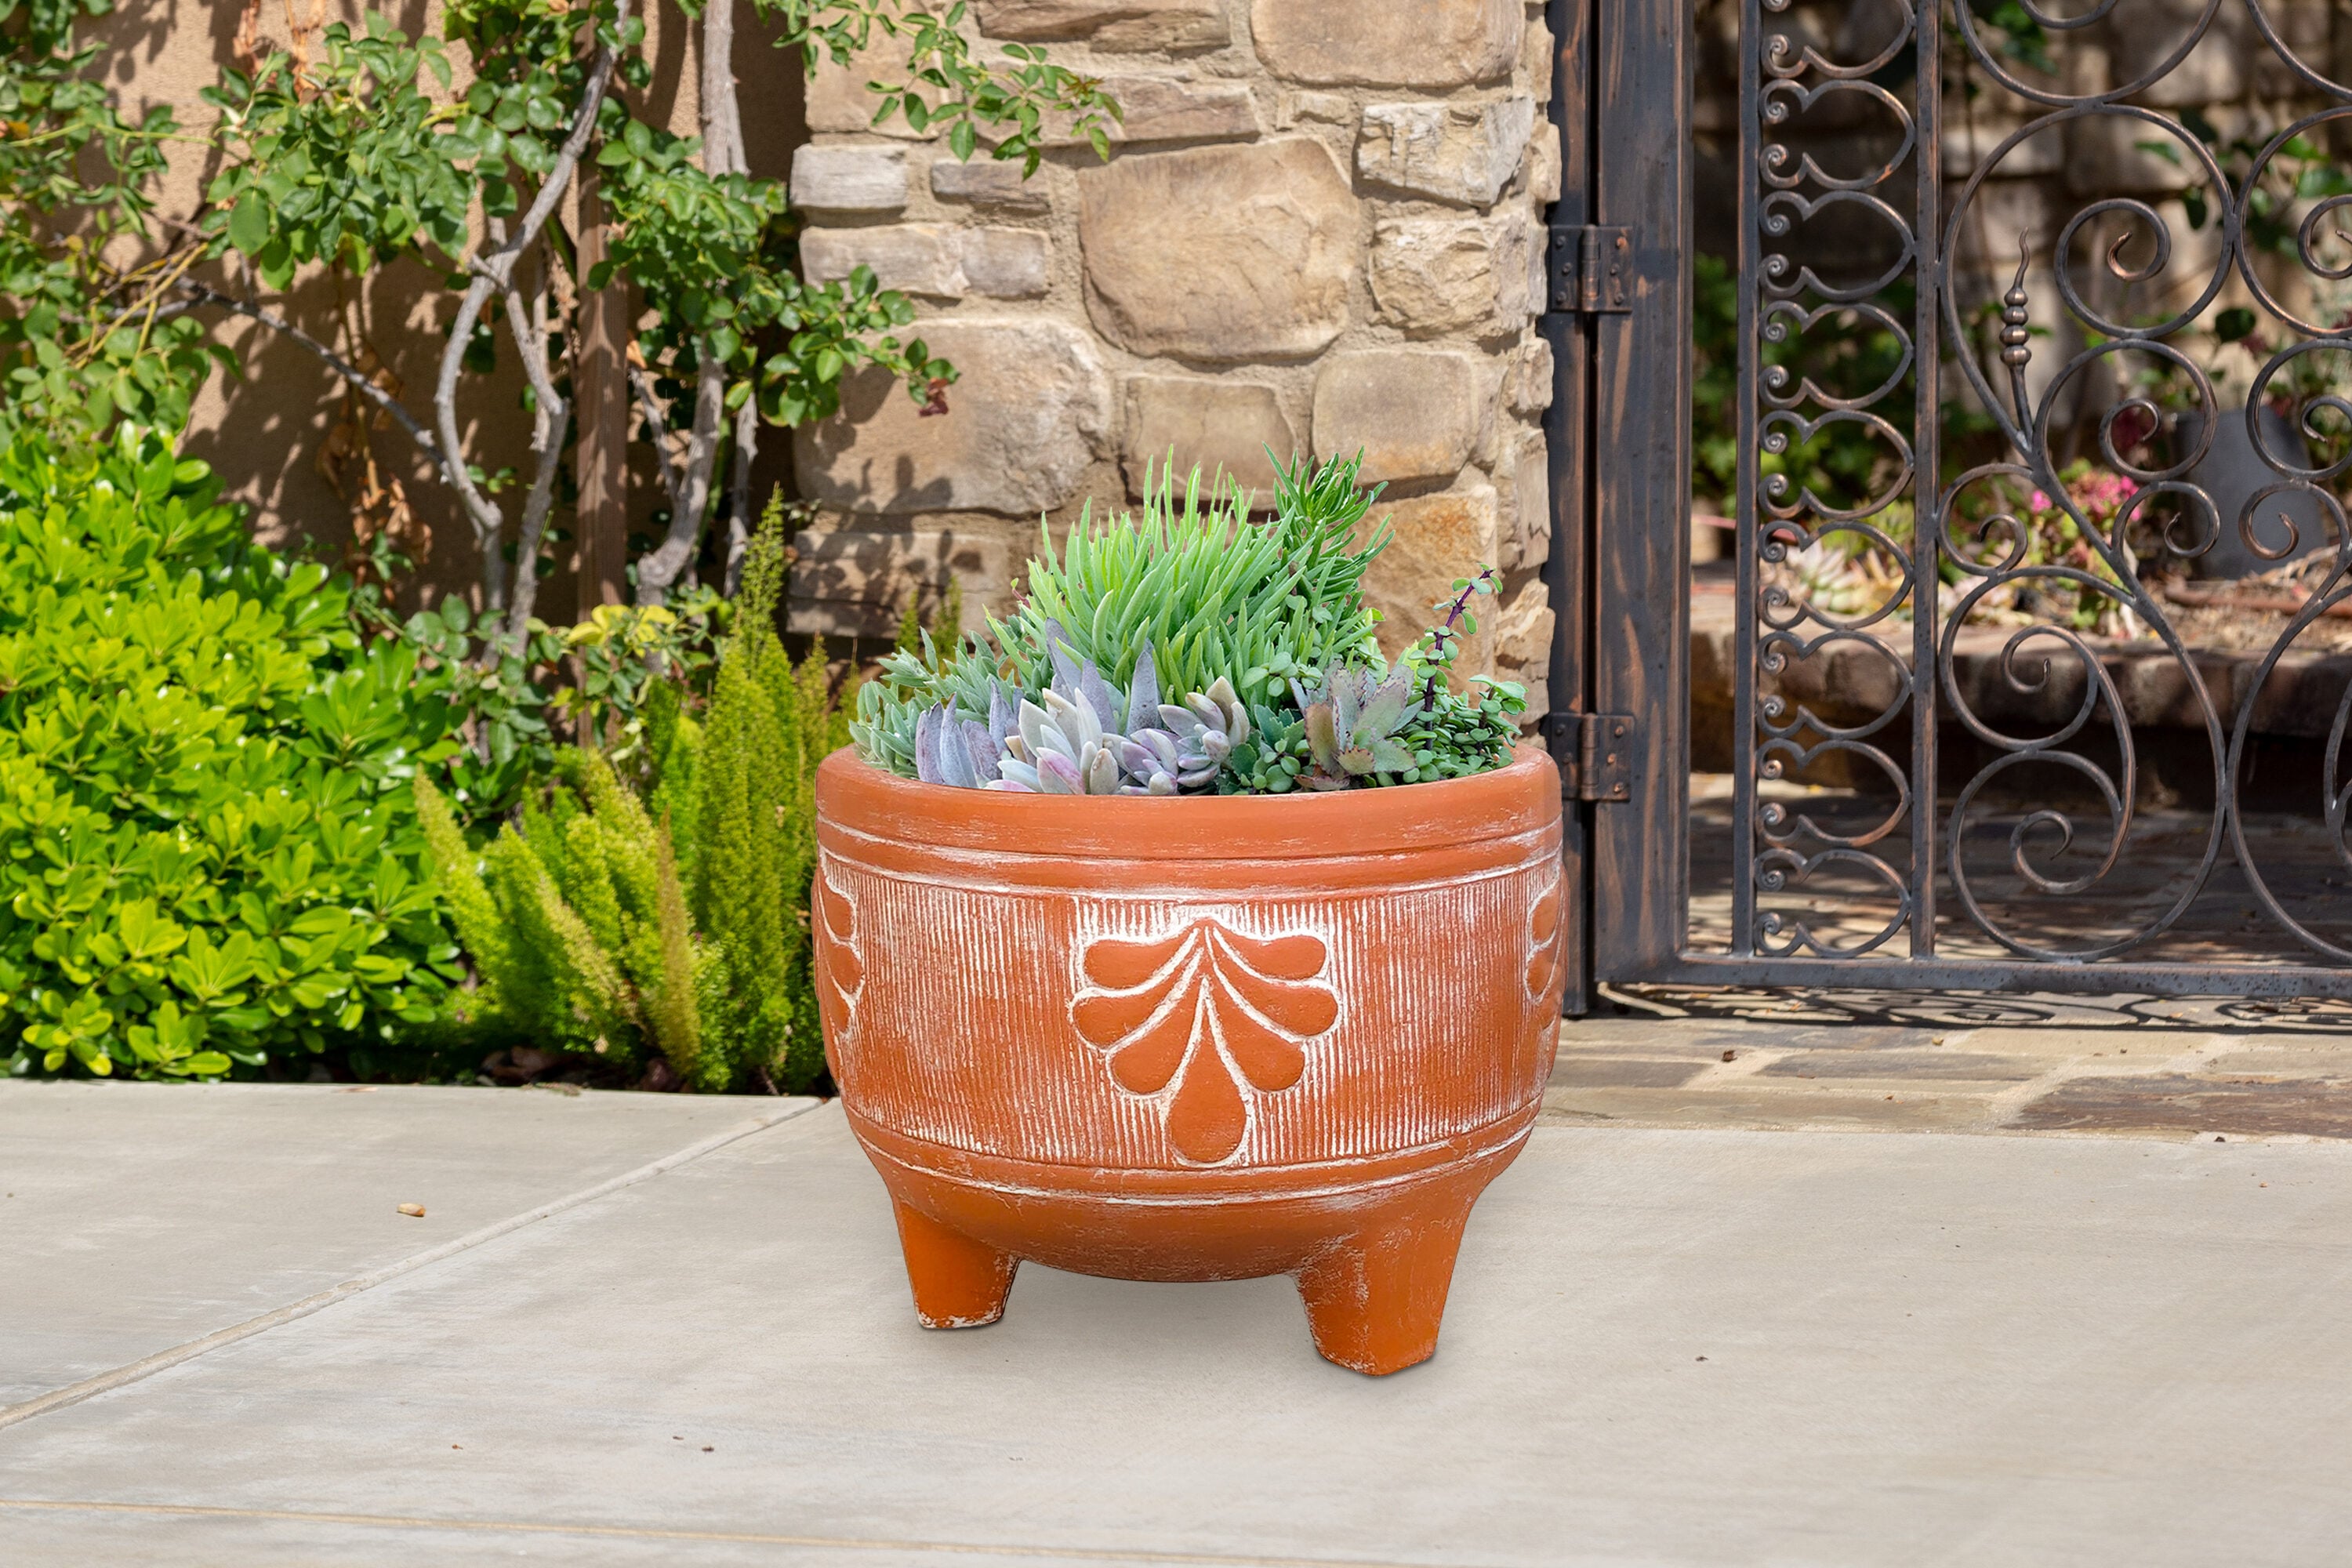 12.5-in x 10.5-in Terra Cotta Clay Planter with Drainage Holes at